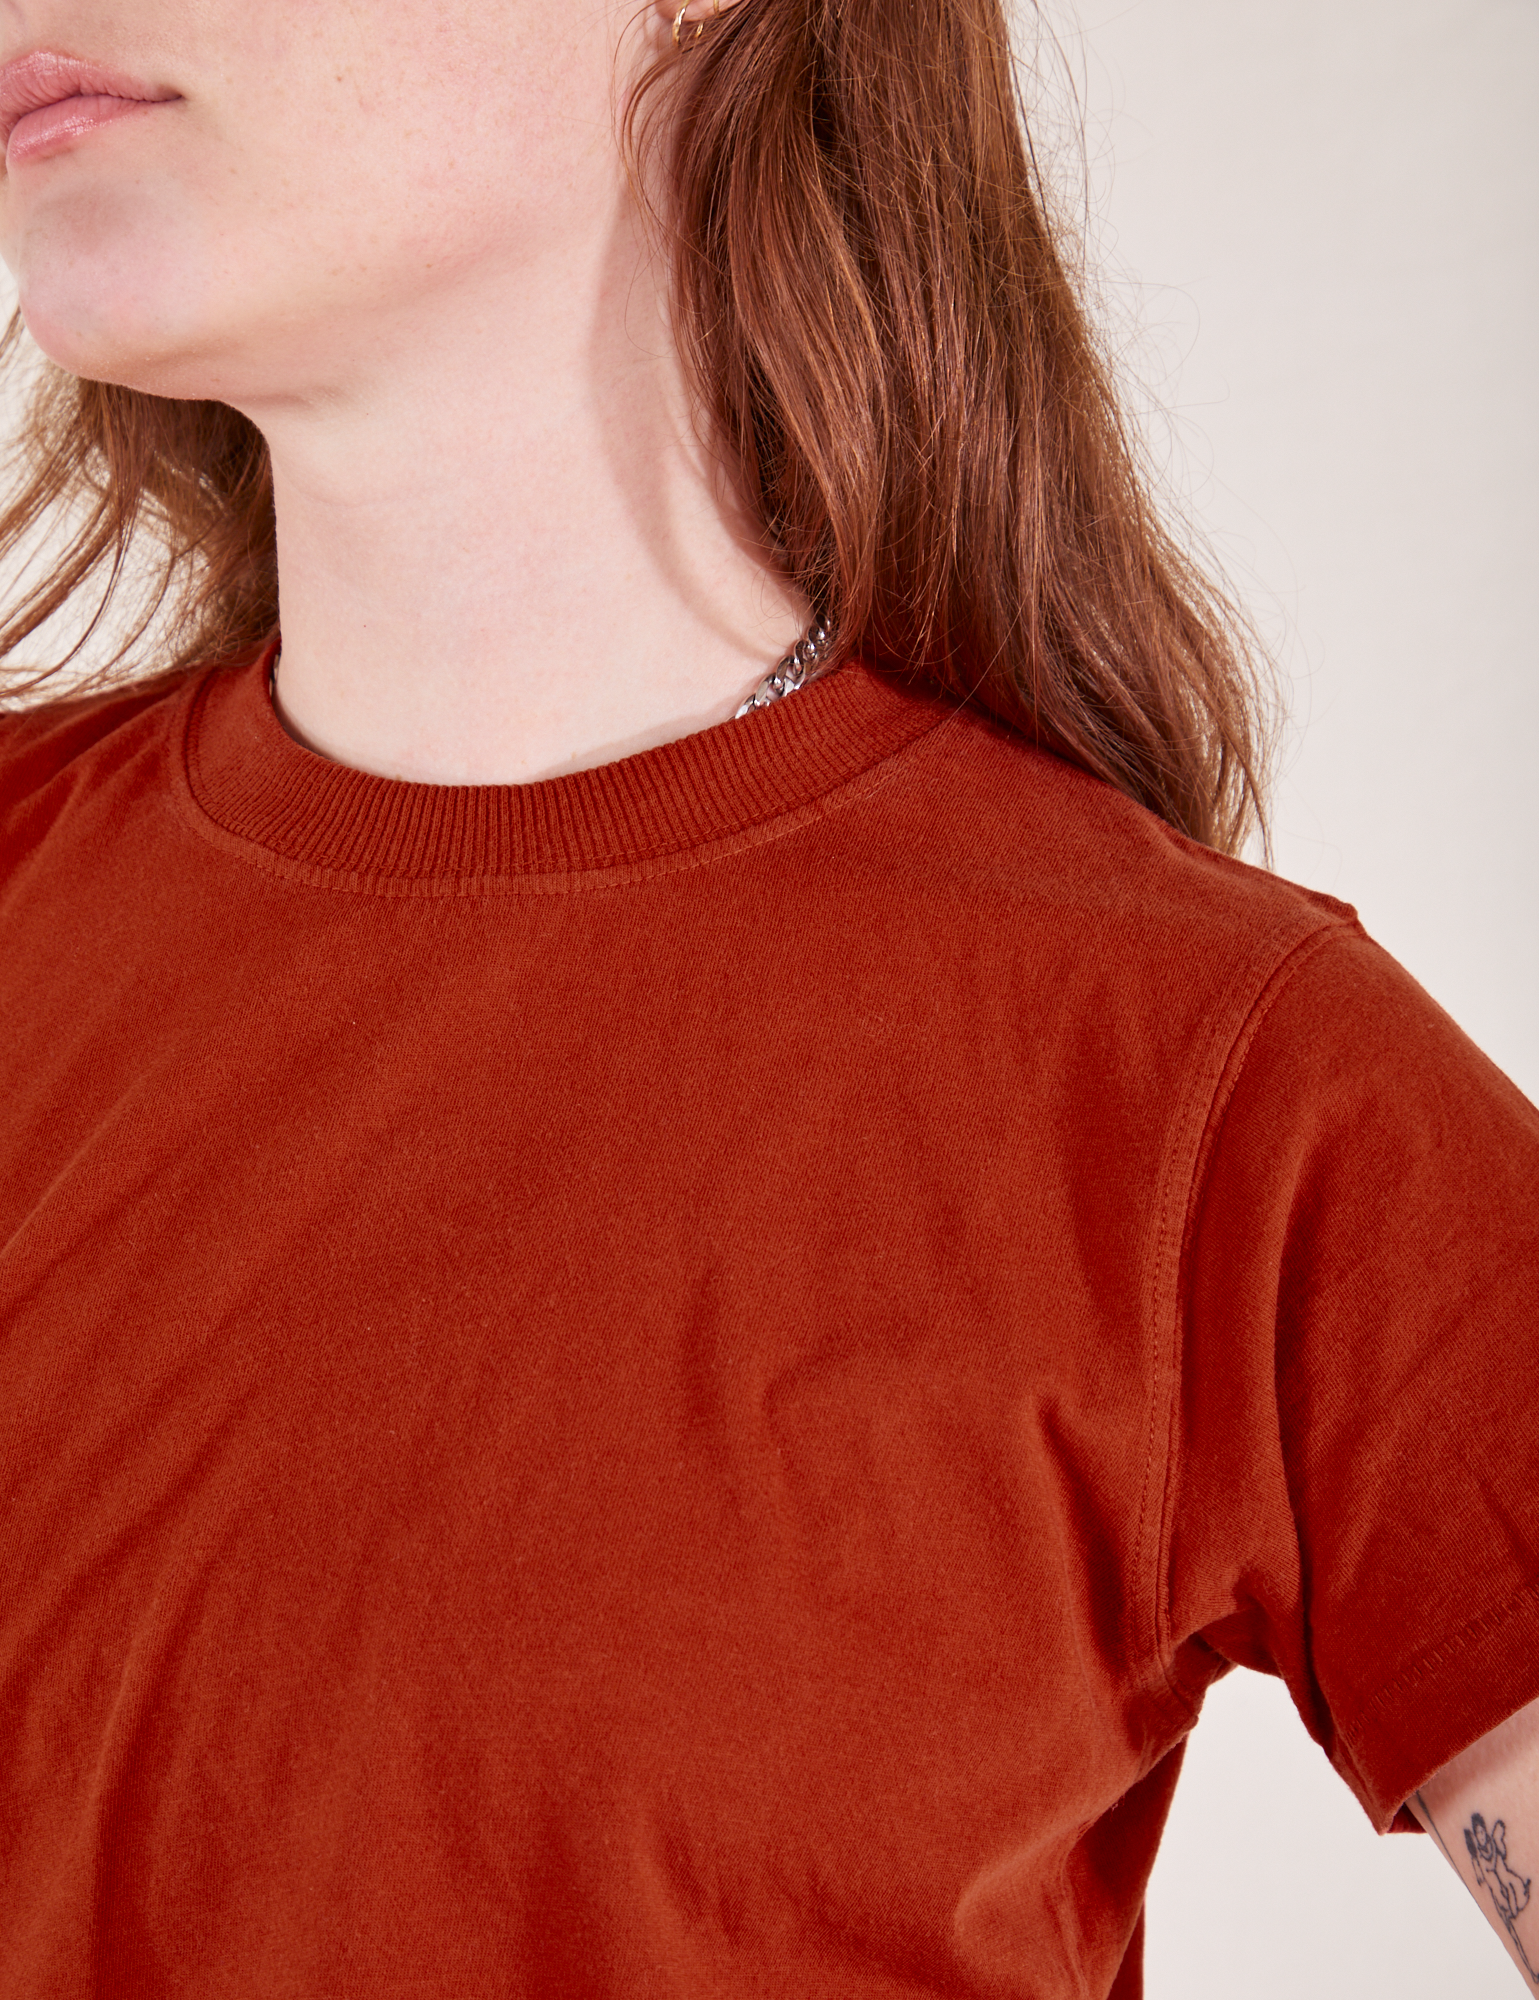 The Organic Vintage Tee in Paprika front close up on Alex